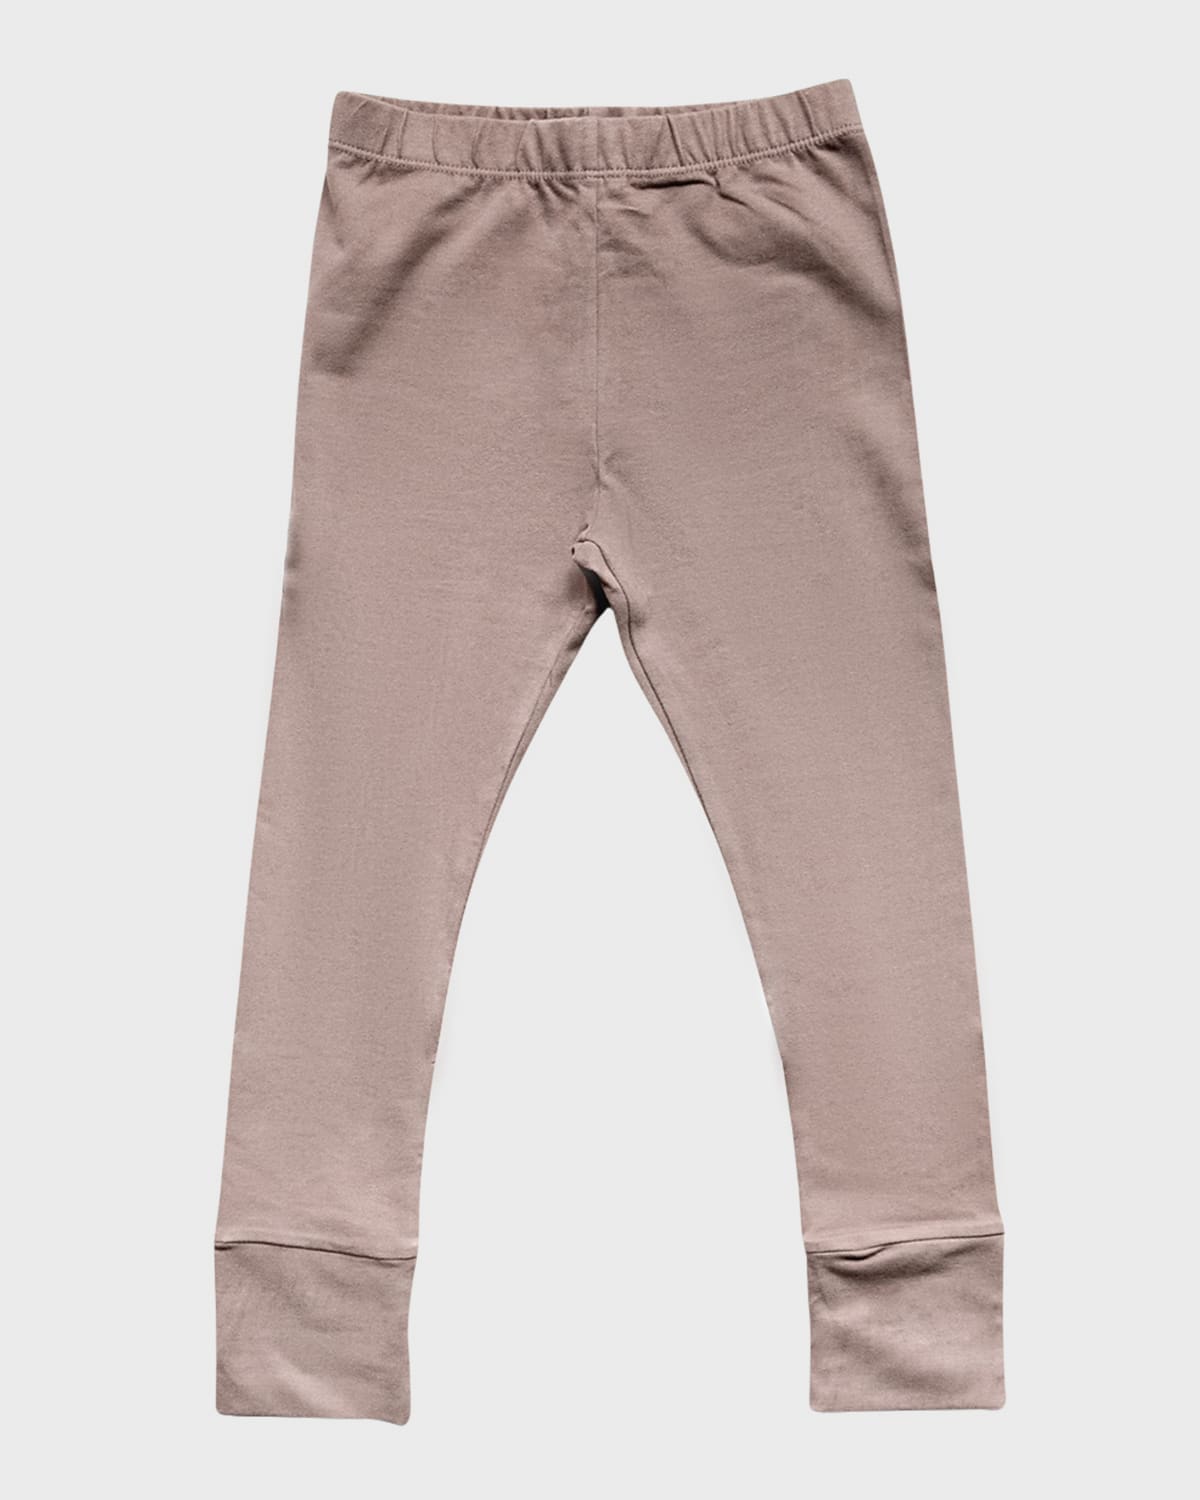 The Simple Folk Kids' Girl's The Everyday Organic Cotton Leggings In Antique Rose